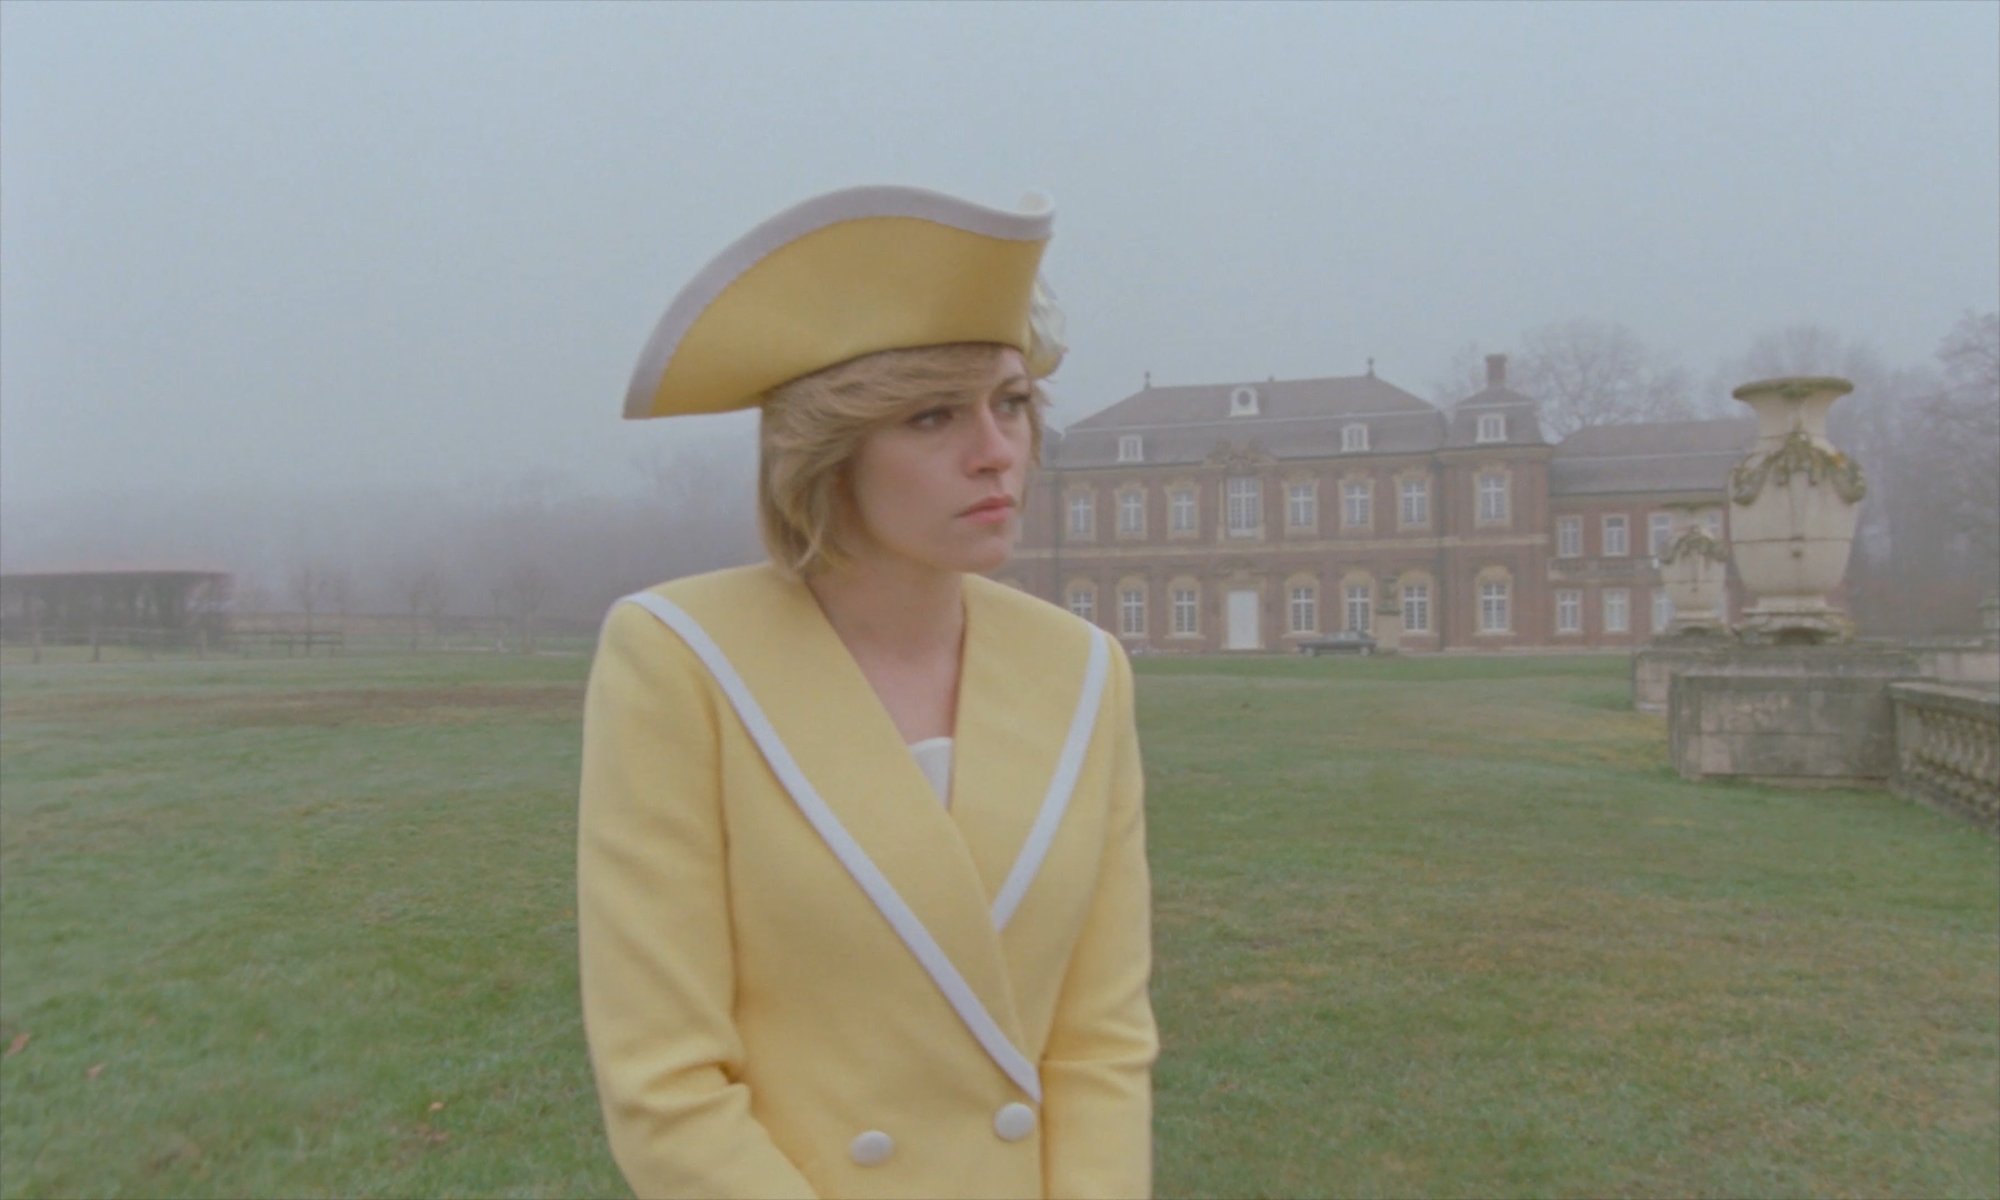 'Spencer' star Kristen Stewart as Princess Diana at Sandringham wearing a bright yellow costume in a foggy landscape